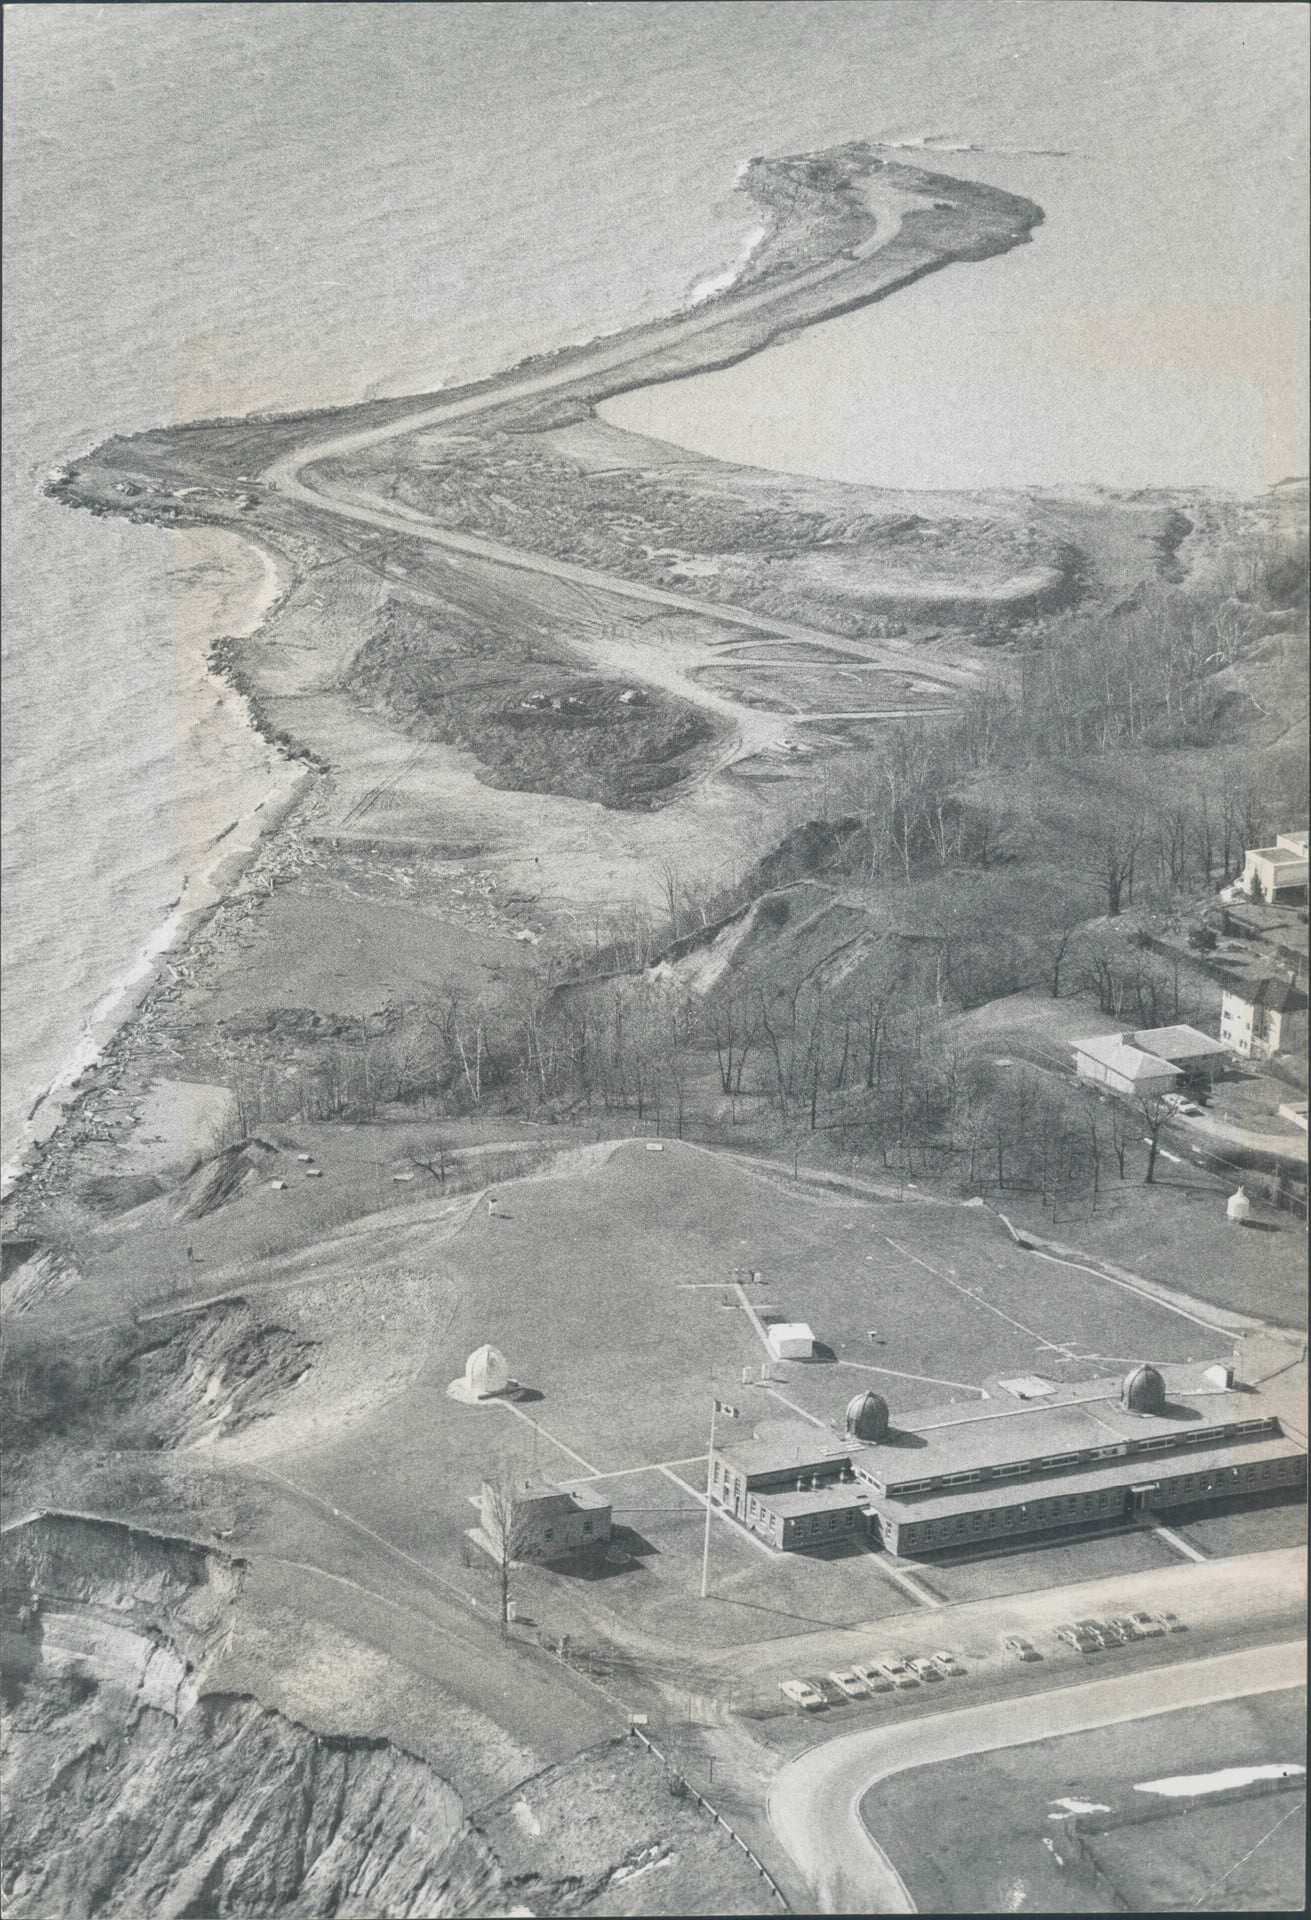 The view of Bluffer's Park under construction from the bottom of Eastville Avenue, 1973